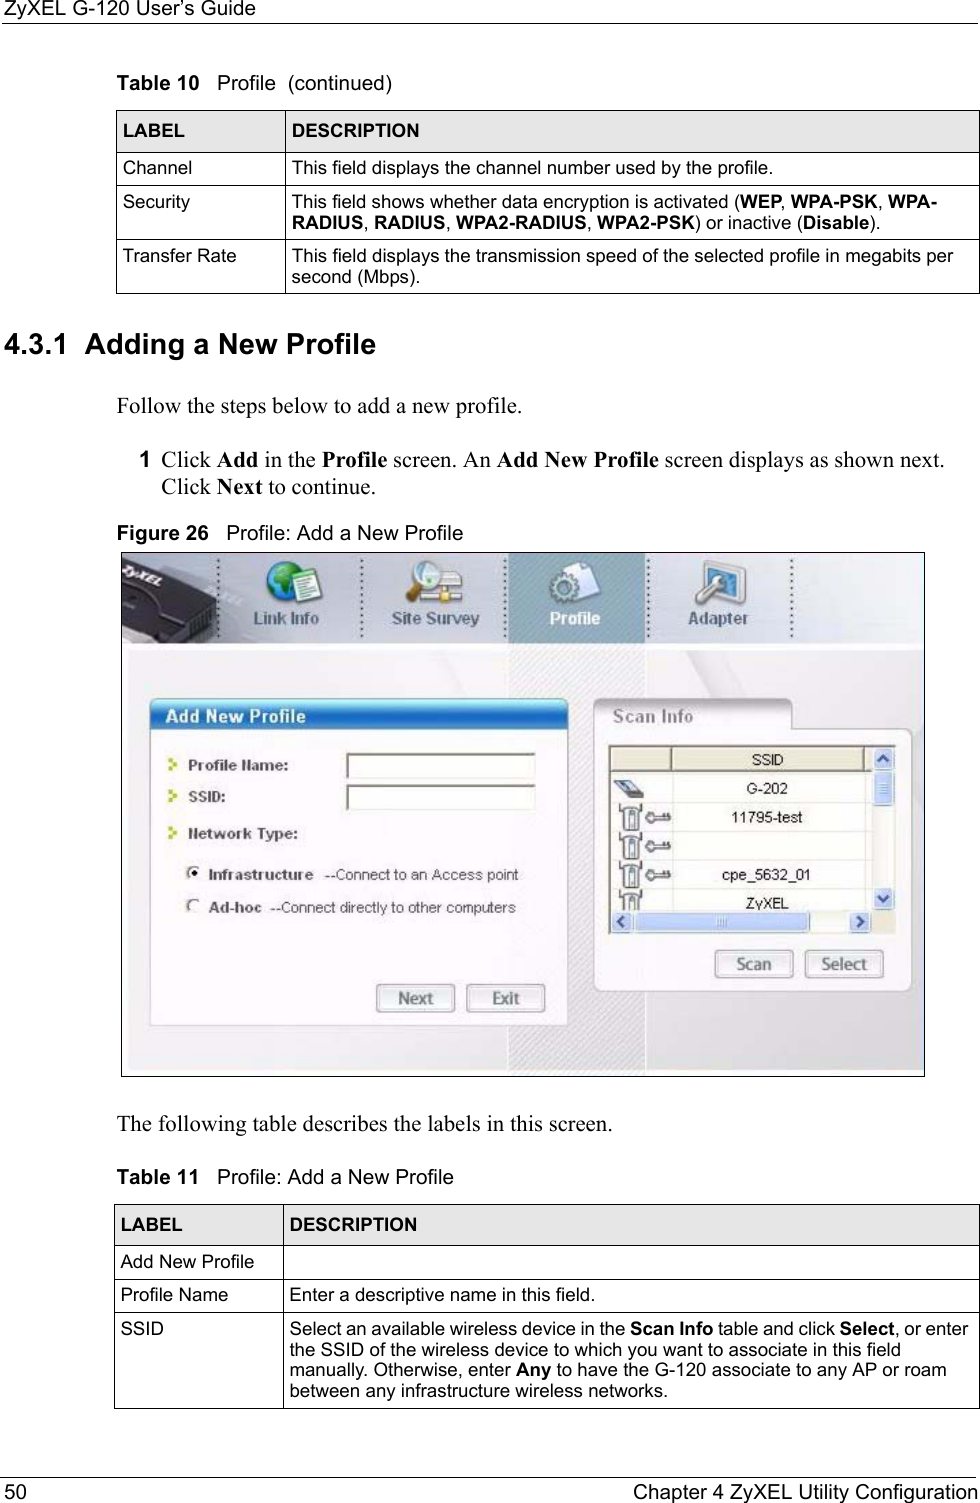 ZyXEL G-120 User’s Guide50 Chapter 4 ZyXEL Utility Configuration4.3.1  Adding a New ProfileFollow the steps below to add a new profile.1Click Add in the Profile screen. An Add New Profile screen displays as shown next. Click Next to continue.Figure 26   Profile: Add a New Profile The following table describes the labels in this screen. Channel This field displays the channel number used by the profile.Security This field shows whether data encryption is activated (WEP, WPA-PSK, WPA-RADIUS, RADIUS, WPA2-RADIUS, WPA2-PSK) or inactive (Disable).Transfer Rate This field displays the transmission speed of the selected profile in megabits per second (Mbps).Table 10   Profile  (continued)LABEL DESCRIPTIONTable 11   Profile: Add a New Profile LABEL DESCRIPTIONAdd New ProfileProfile Name Enter a descriptive name in this field.SSID Select an available wireless device in the Scan Info table and click Select, or enter the SSID of the wireless device to which you want to associate in this field manually. Otherwise, enter Any to have the G-120 associate to any AP or roam between any infrastructure wireless networks.